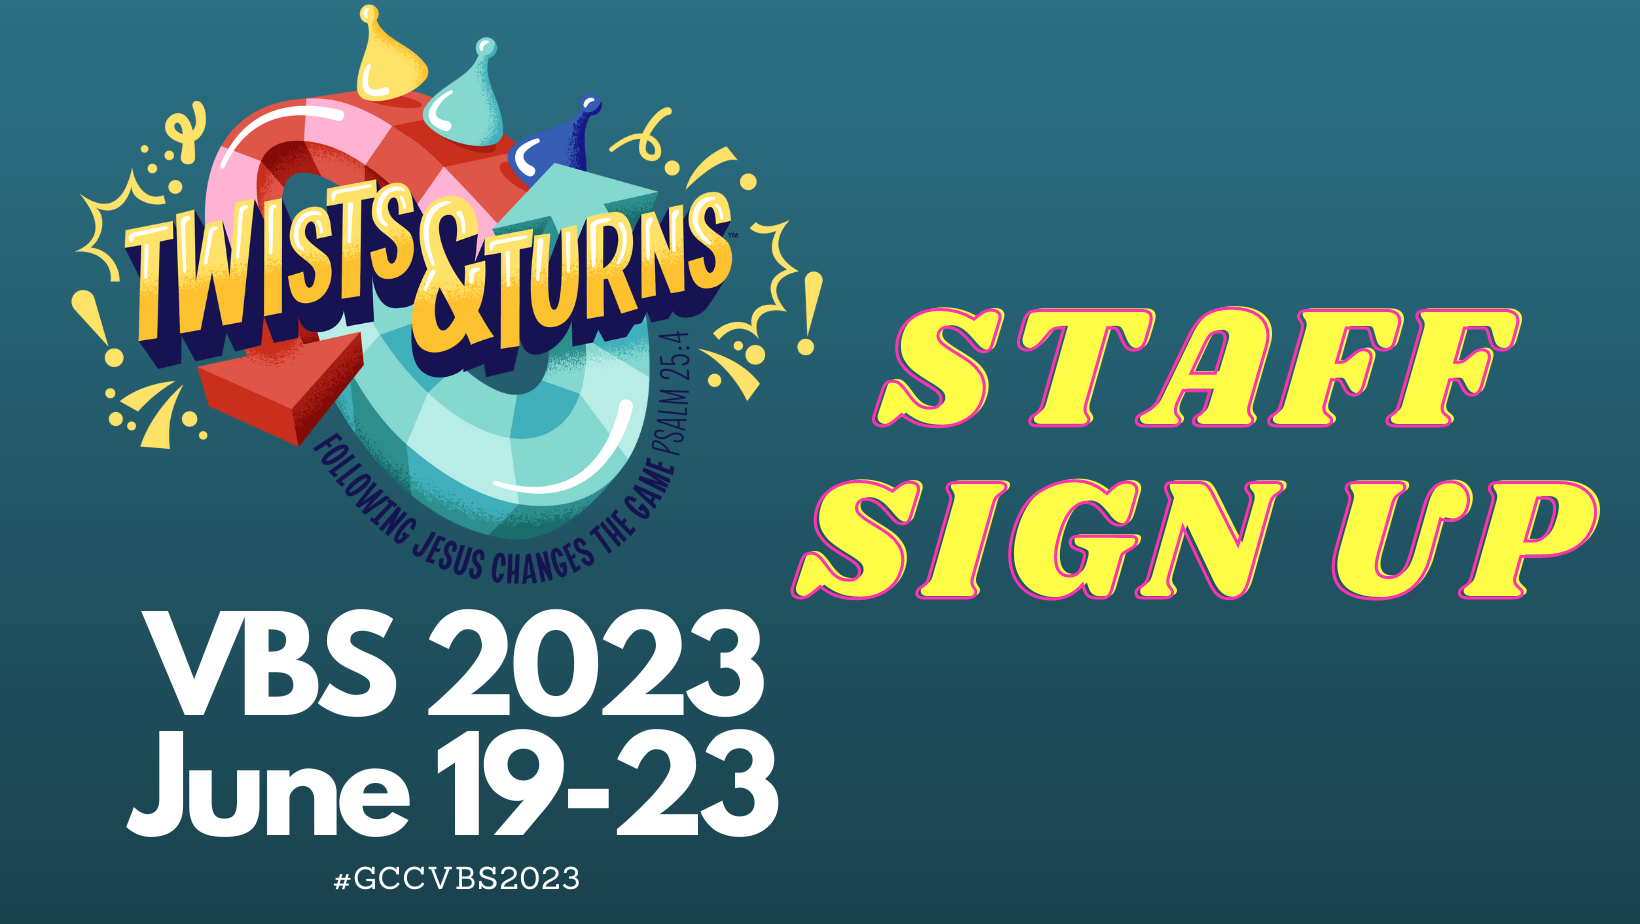 VBS 2023 June 19-23 (967 × 300 px) (Facebook Cover) image